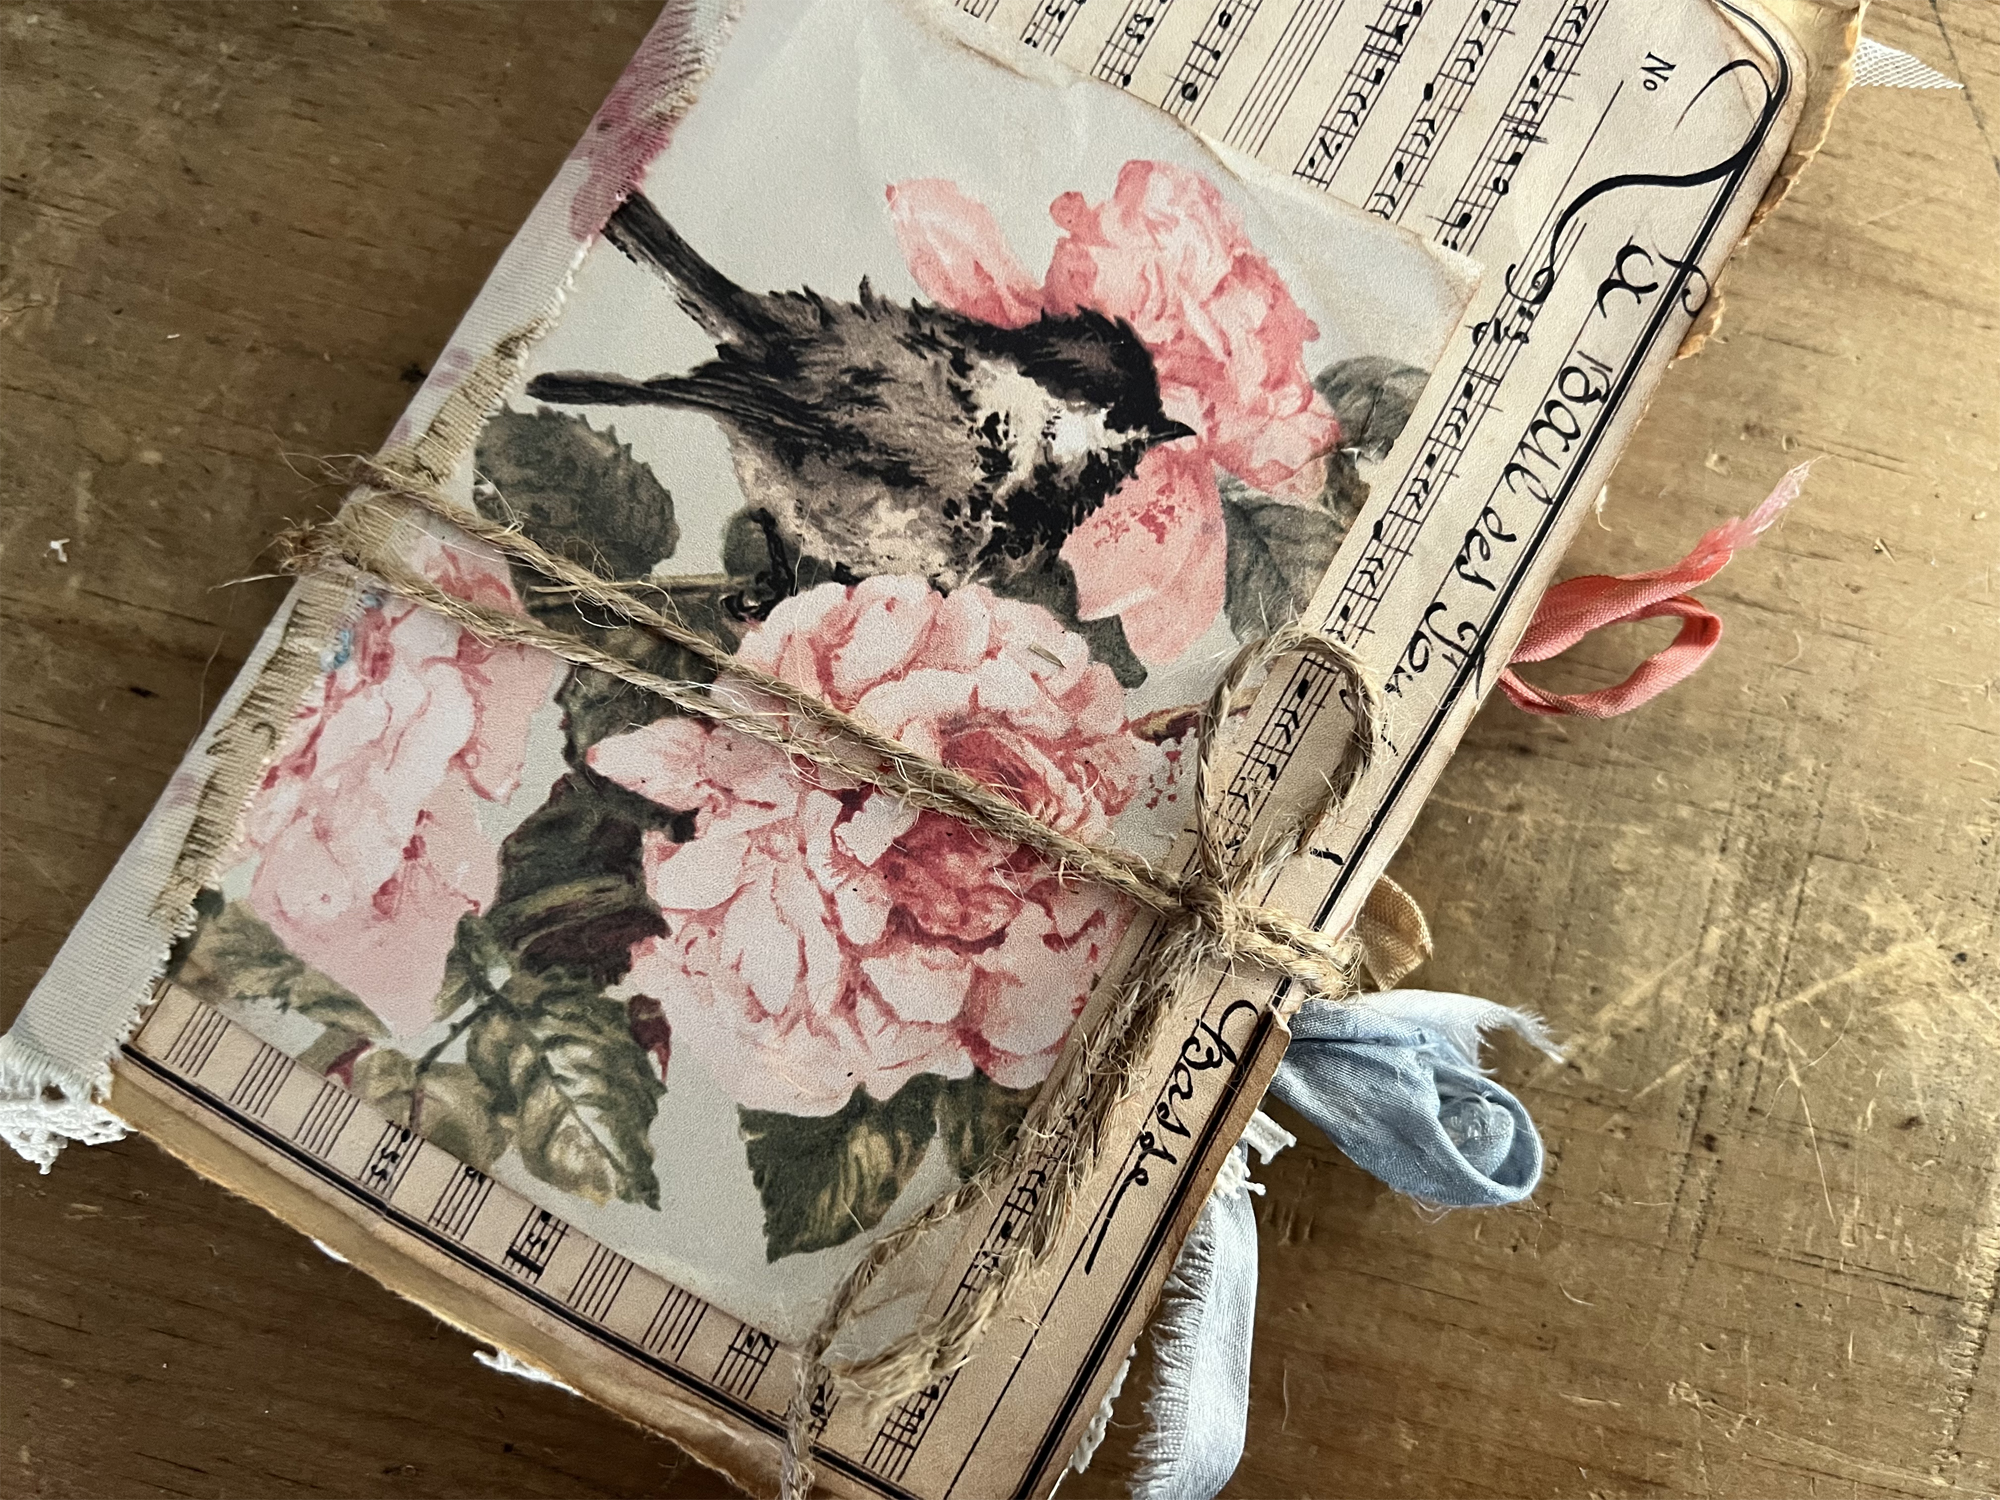 How to Make a Junk Journal - Compass and Ink